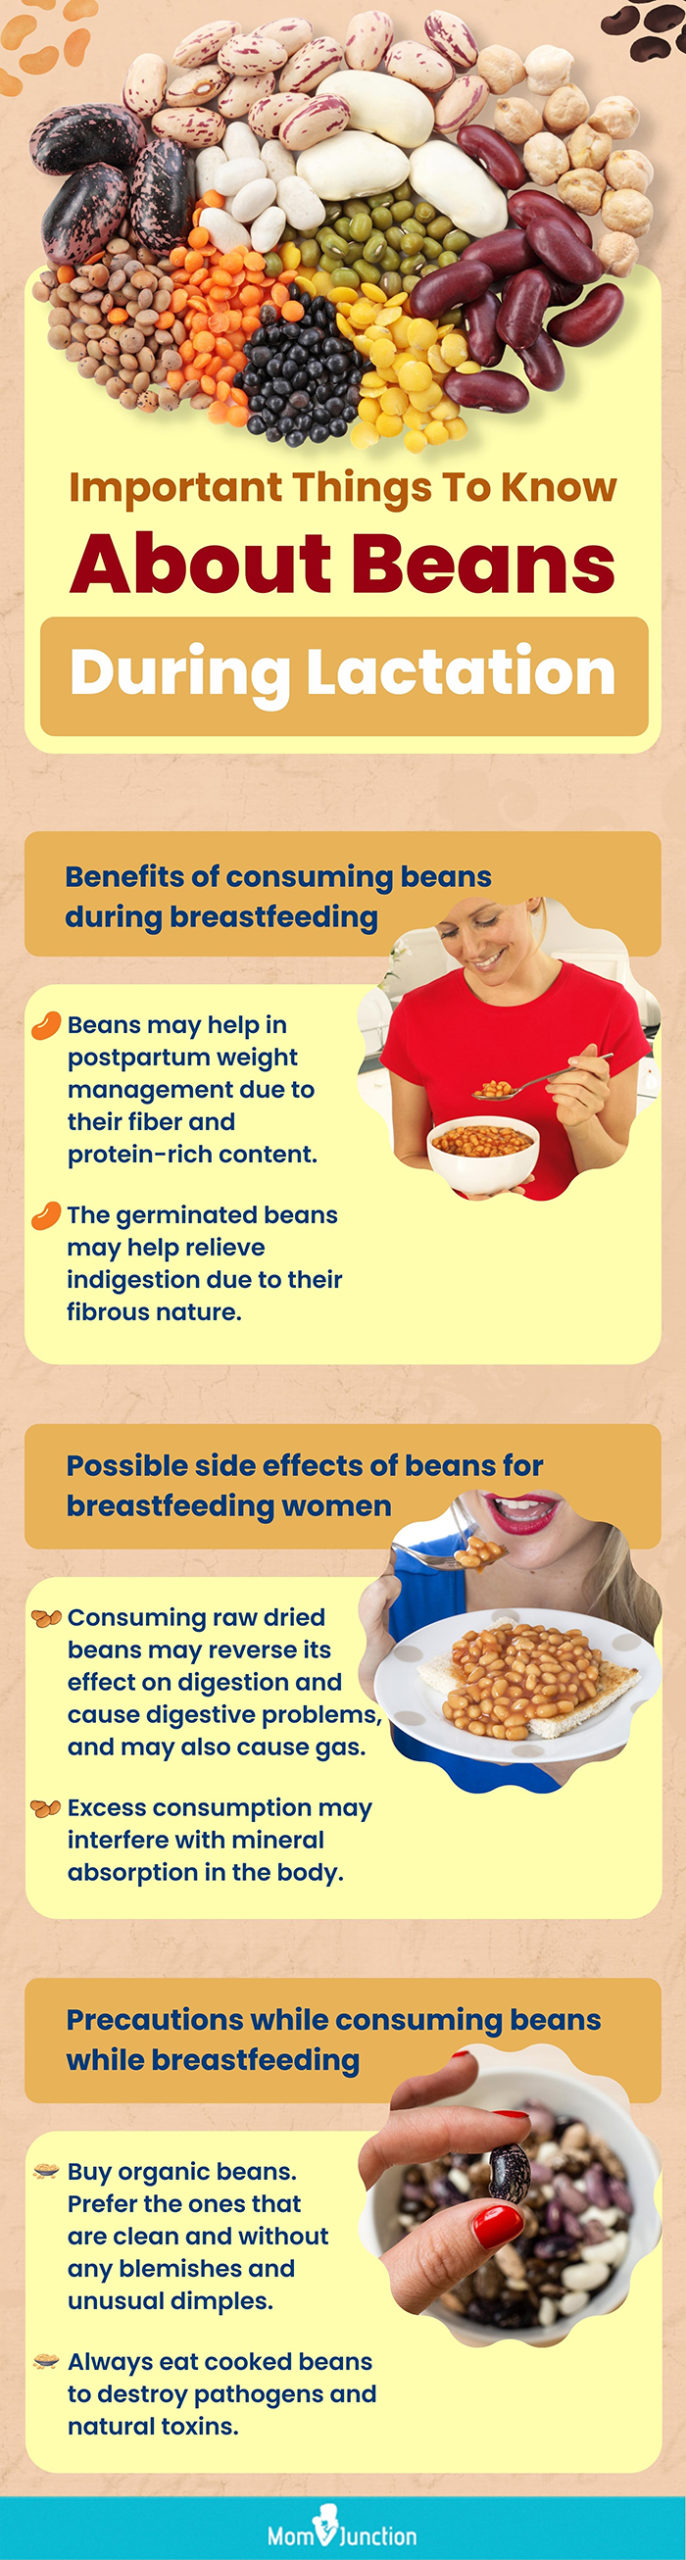 important things to know about beans during lactation (infographic)